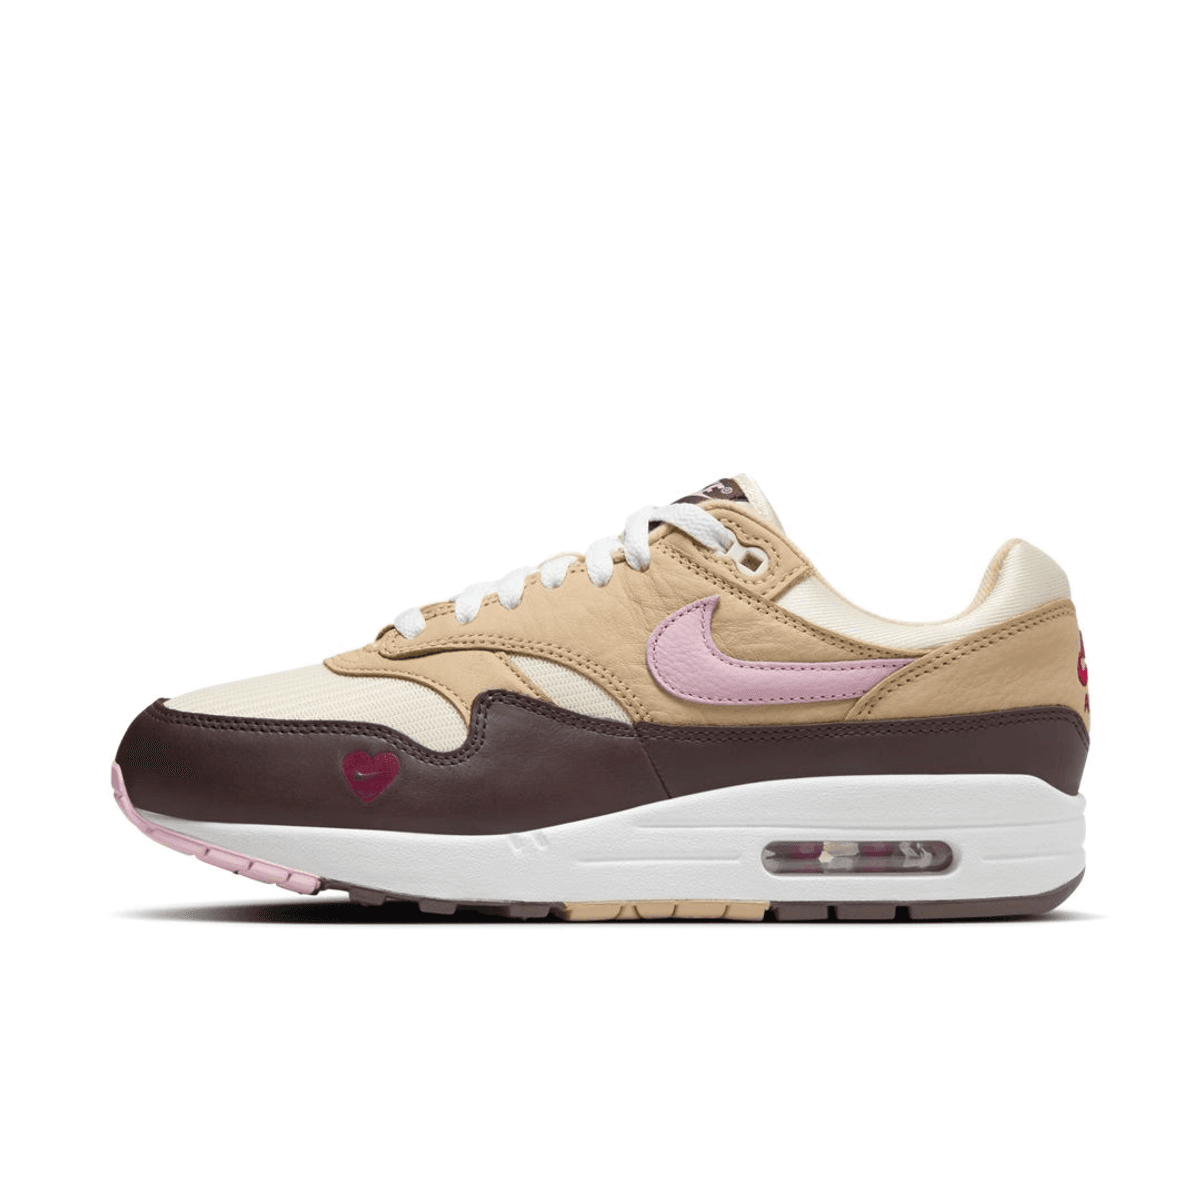 Official Look At The Nike Air Max 1 “Valentine’s Day” (W)